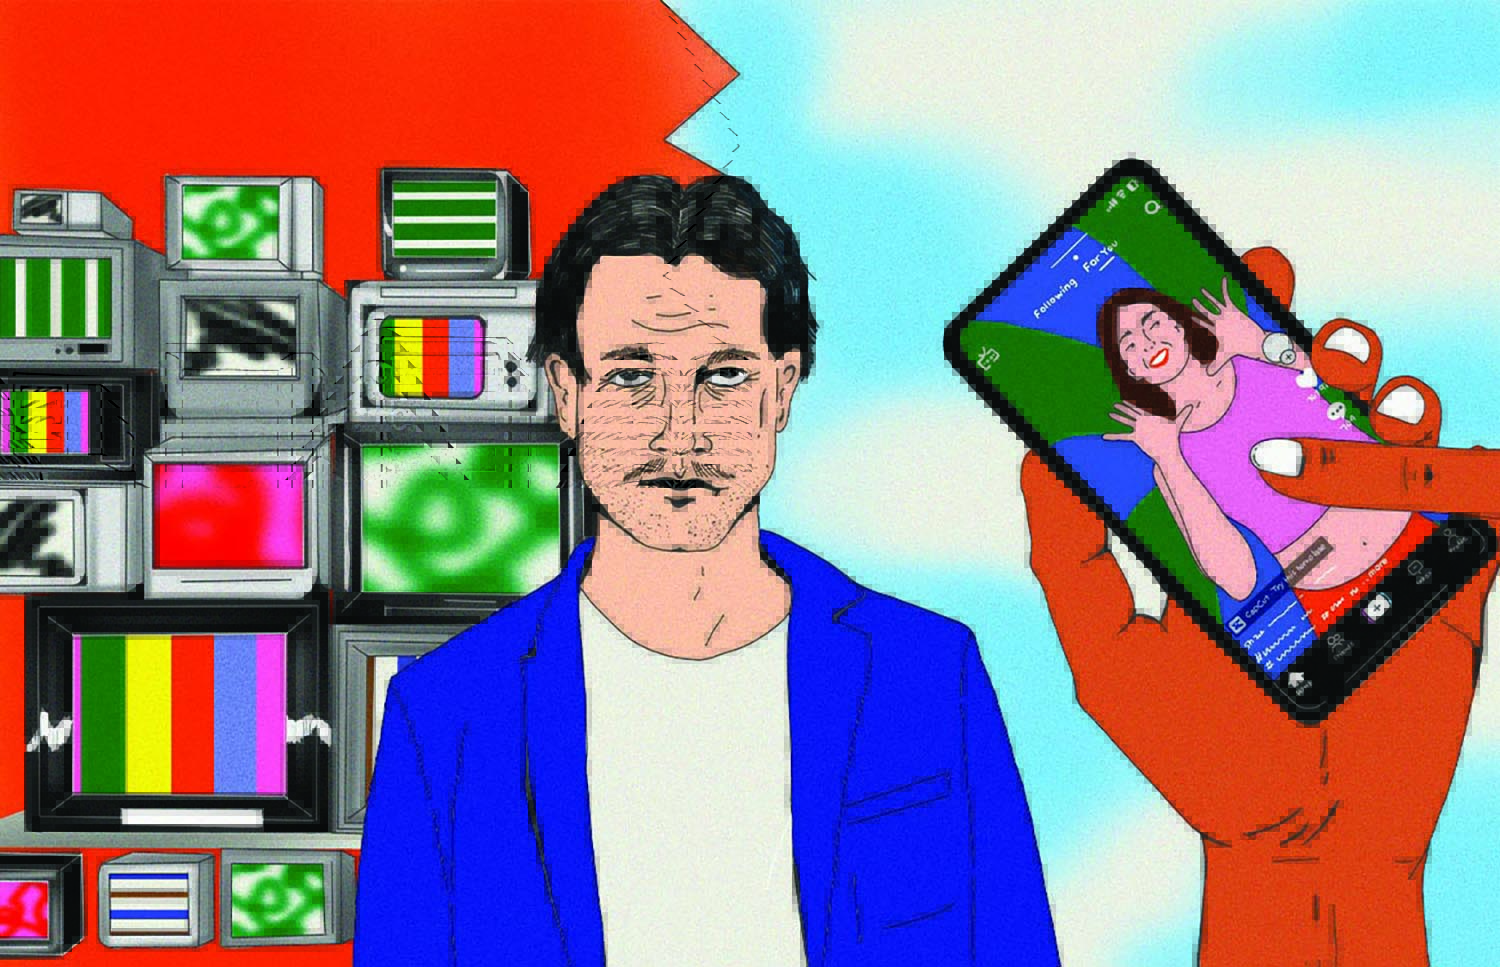 colorful illustration of a man in a blue jacket standing in front of a wall of tv monitors. A hand holding a smartphone is being held up in the foreground